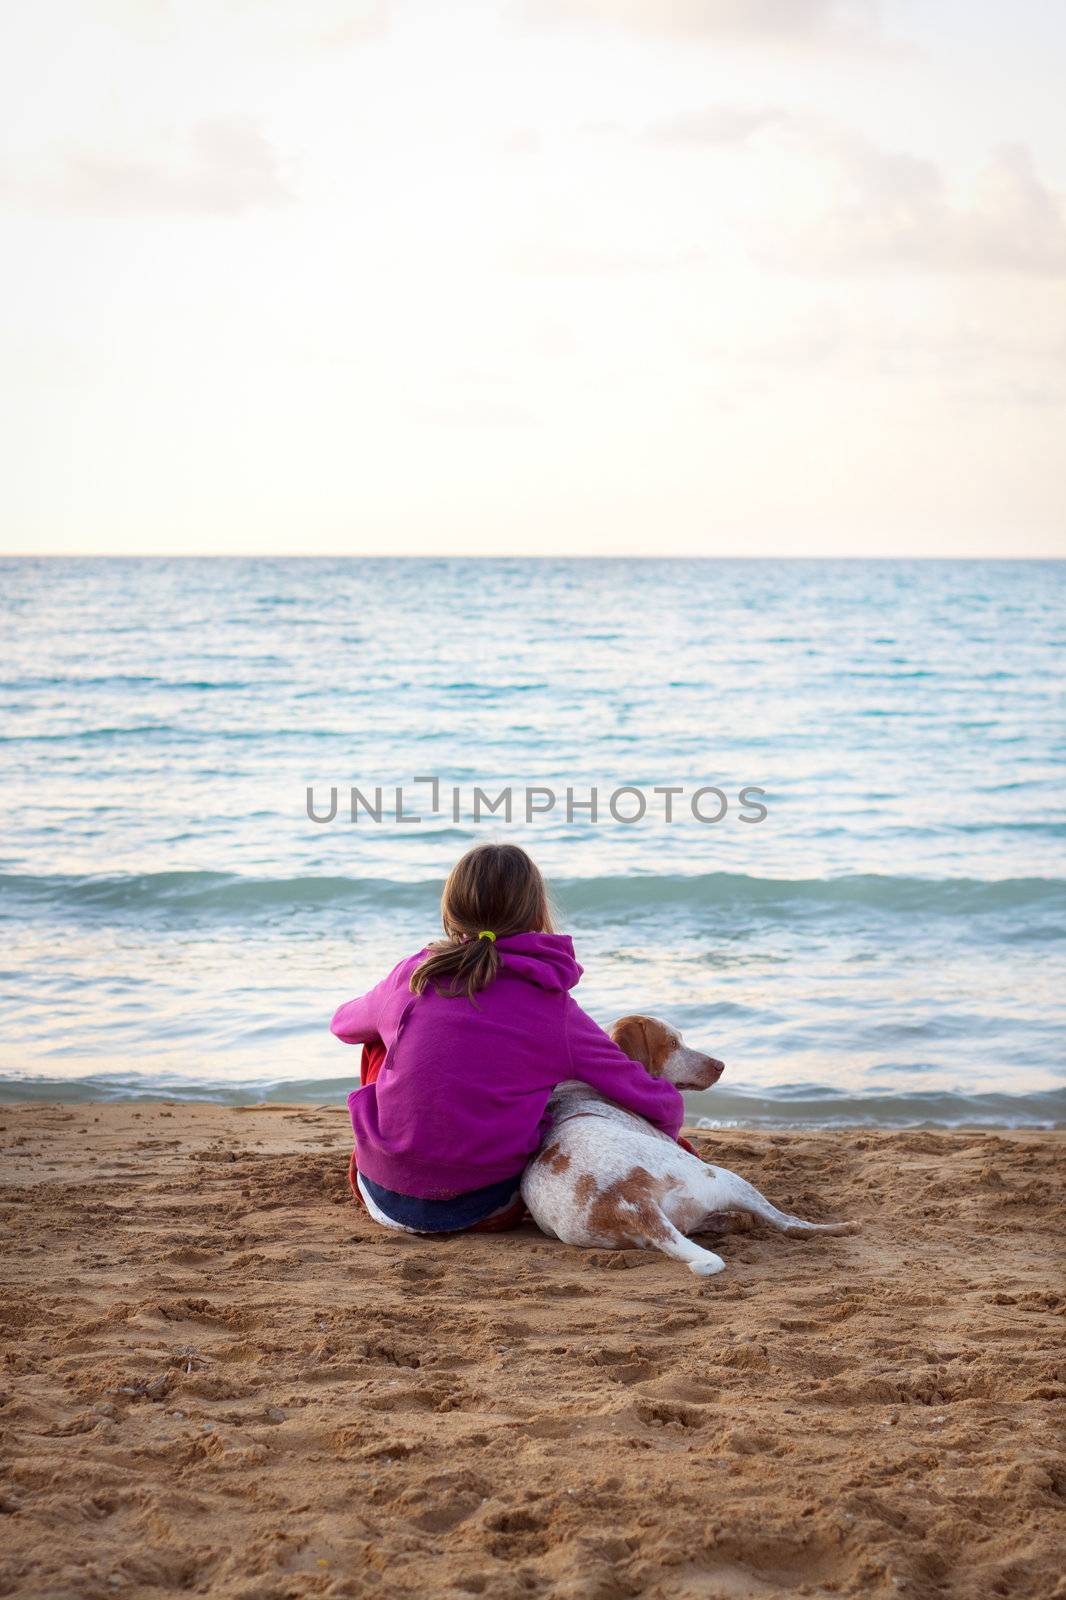 A young female looking out at sea, cuddling her pet dog. Slight vignette